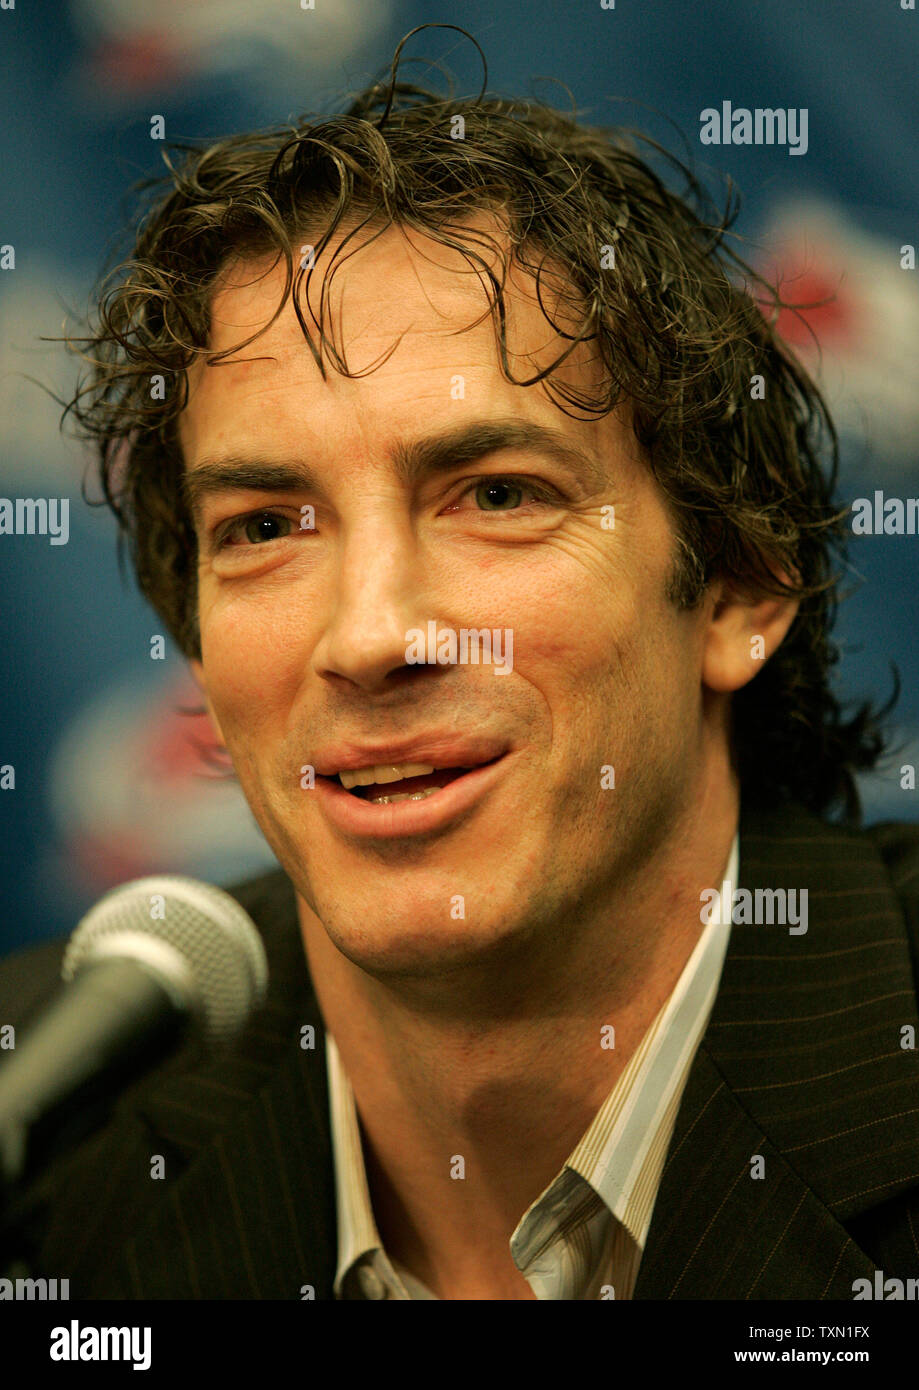 Colorado Avalanche captain Joe Sakic smiles after announcing his signing a new one-year deal to remain with the Colorado Avalanche during a press conference at the Pepsi Center in Denver April 9, 2007.   Sakic joins NHL former great Gordie Howe as the only players to reach the 100 point mark at the age of 37 or older.  Sakic finished the 2006-07 season with 36 goals and 64 assists.  (UPI Photo/Gary C. Caskey) Stock Photo